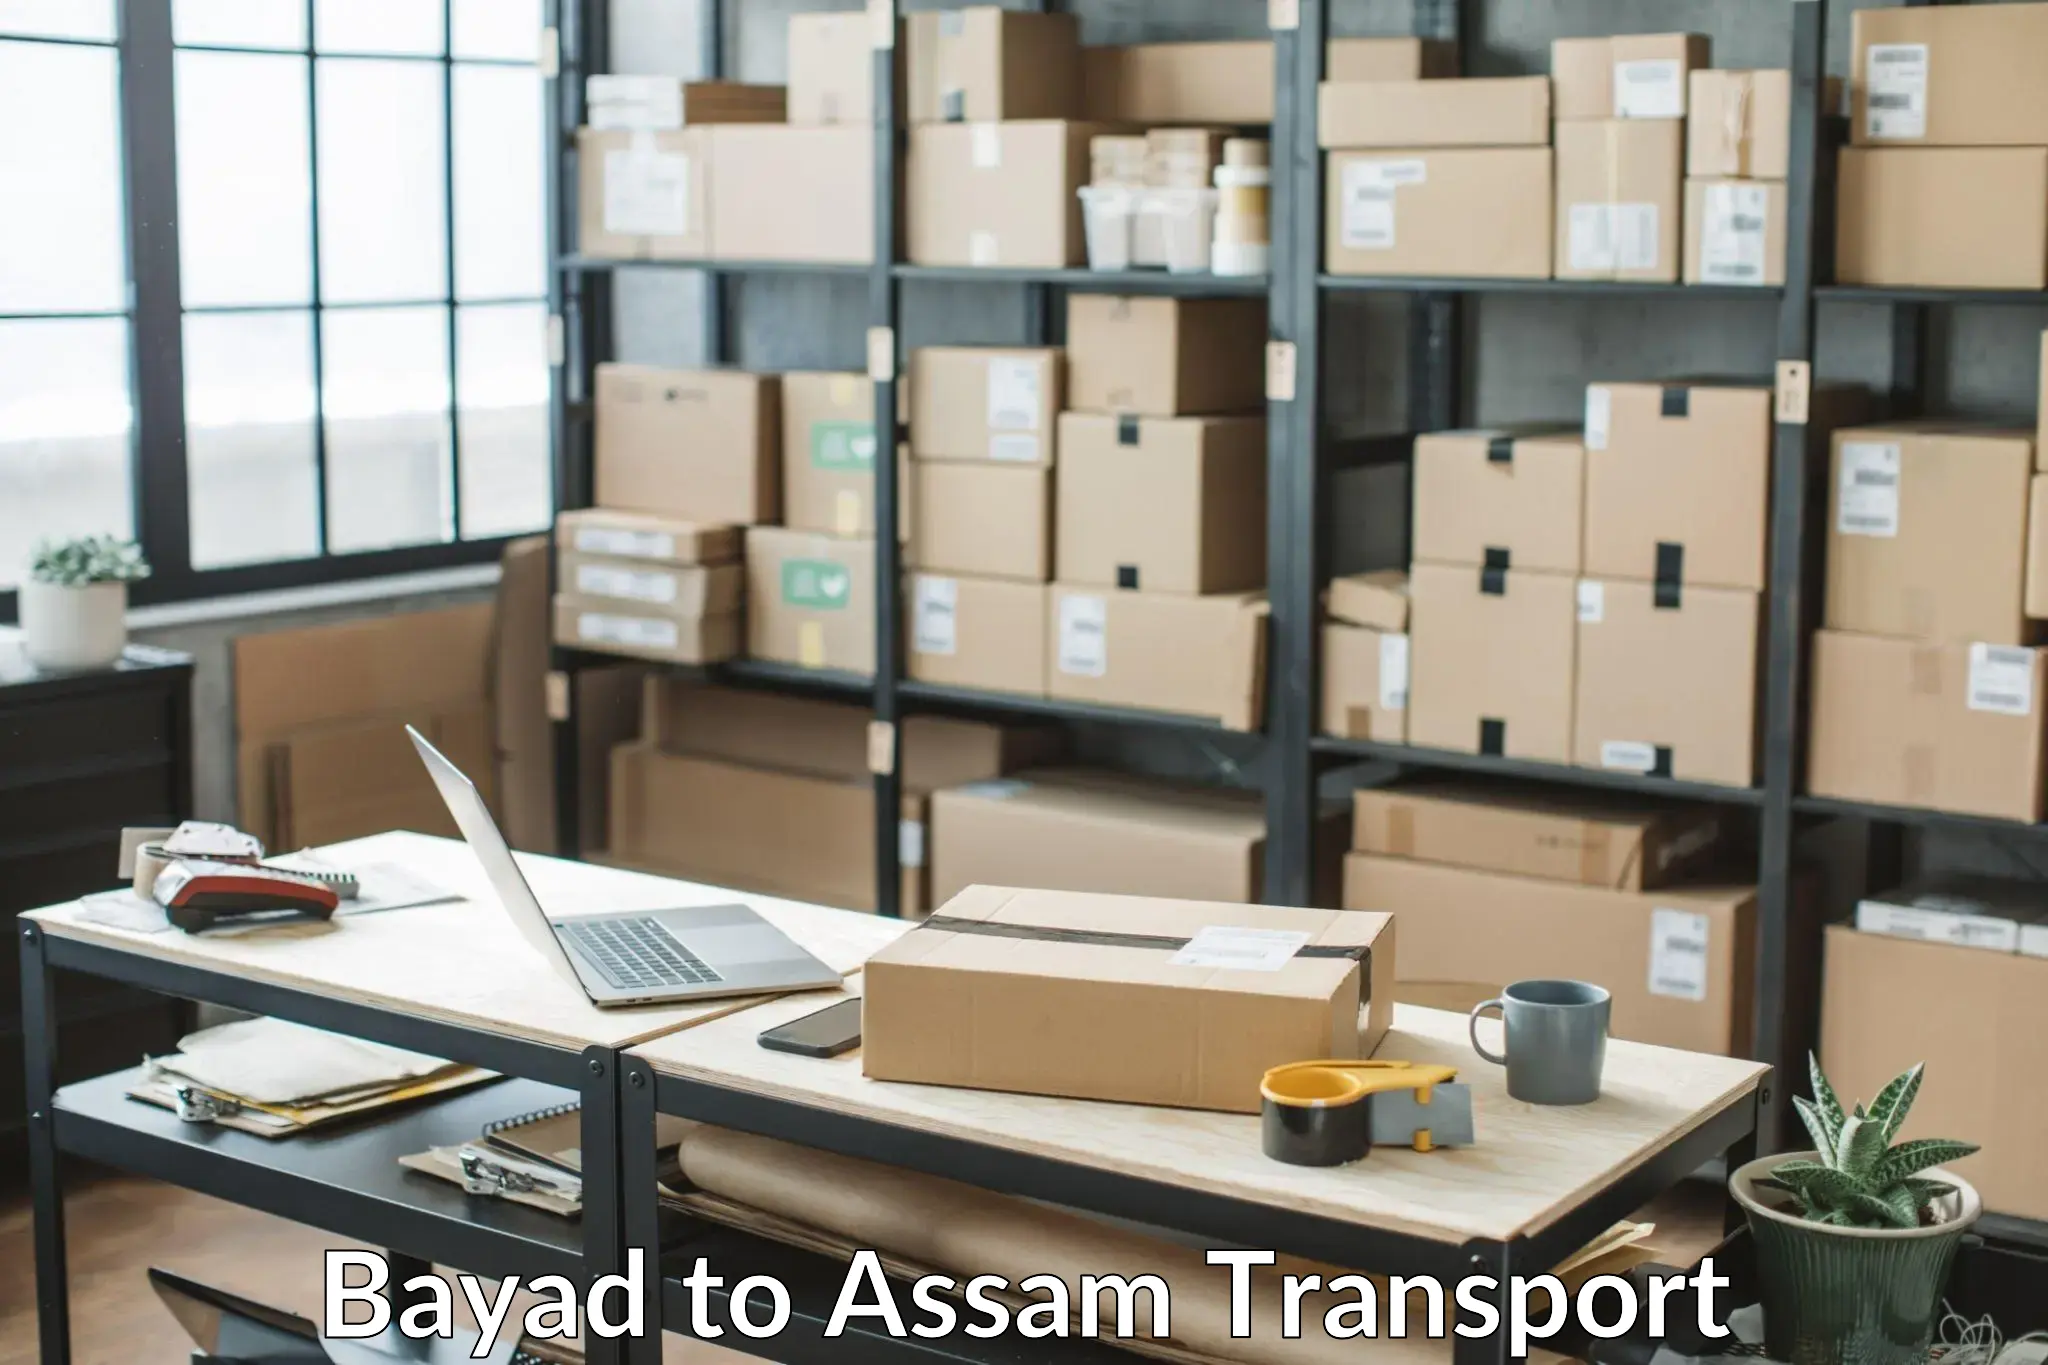 All India transport service Bayad to Lala Assam